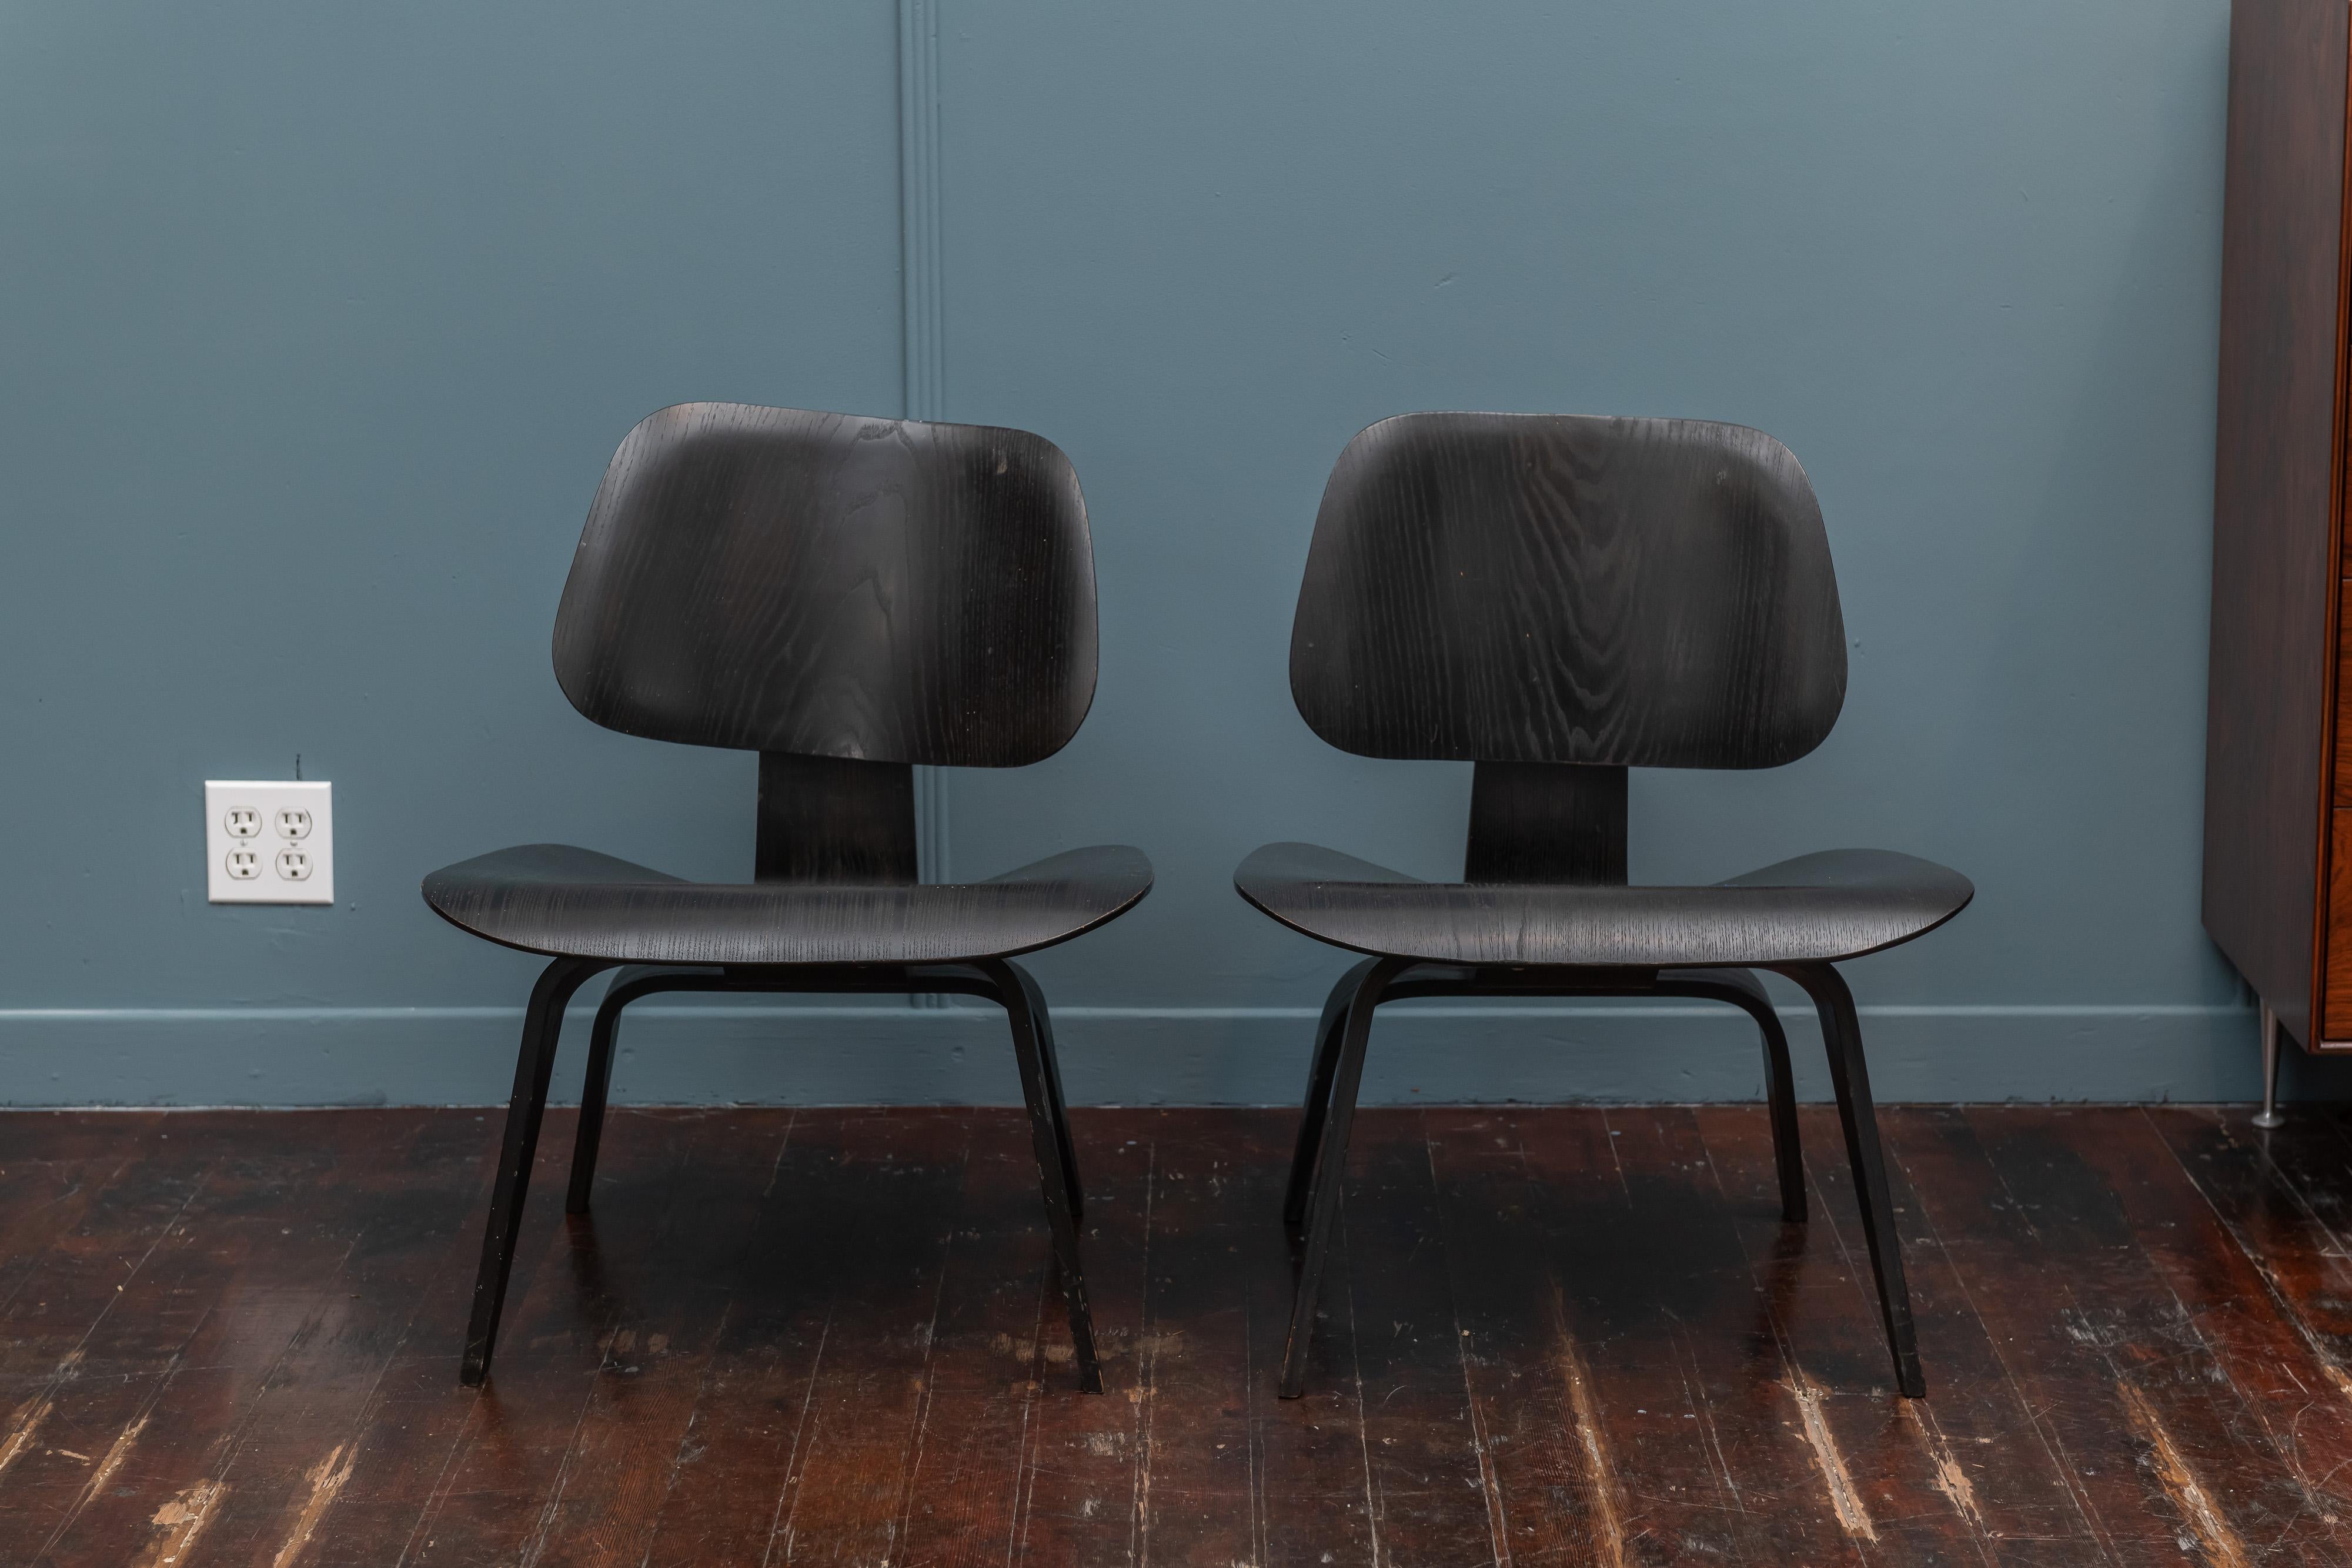 Rare pair of early production (5 x 2 x 5 screw mounts) Charles Eames design LCW (lounge chair wood). Original analine black finish in very good original condition.
One rear shock mount is separated but stable and does not affect the form or